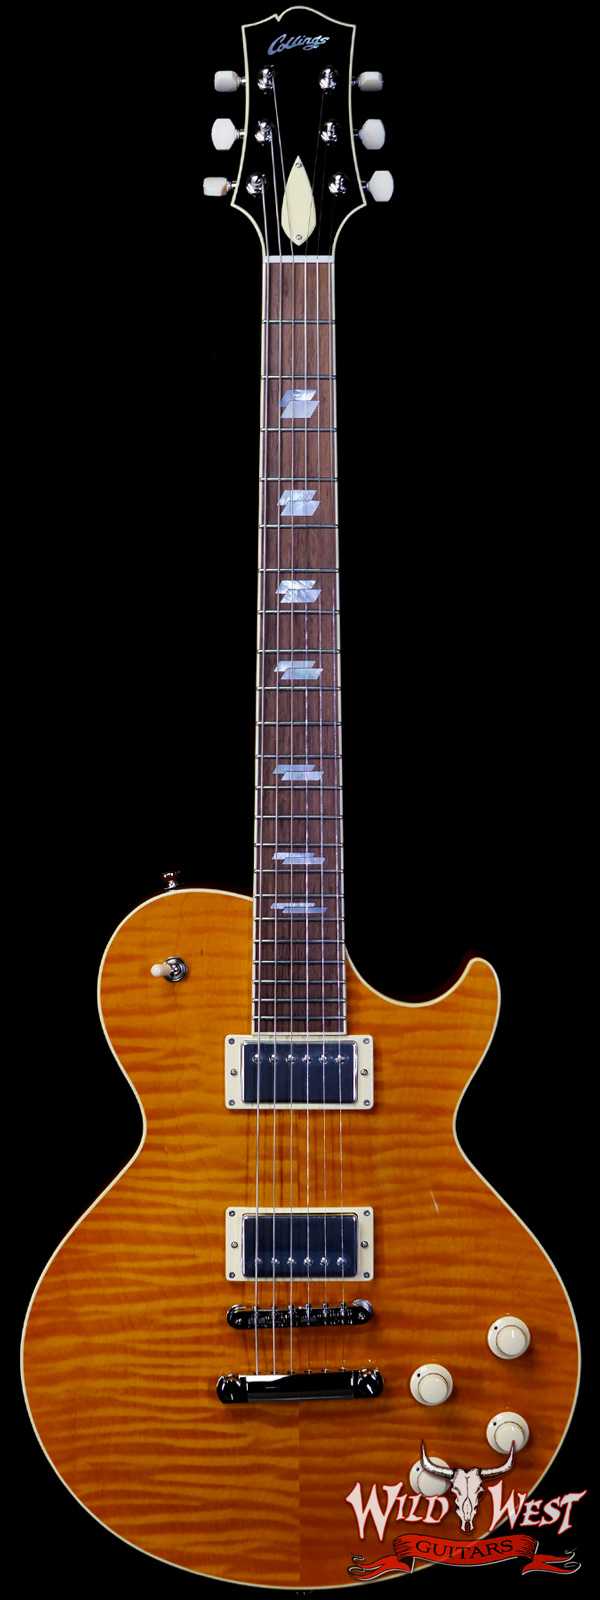 Colling CL Serise City Limited Deluxe Flame Maple Top Blonde